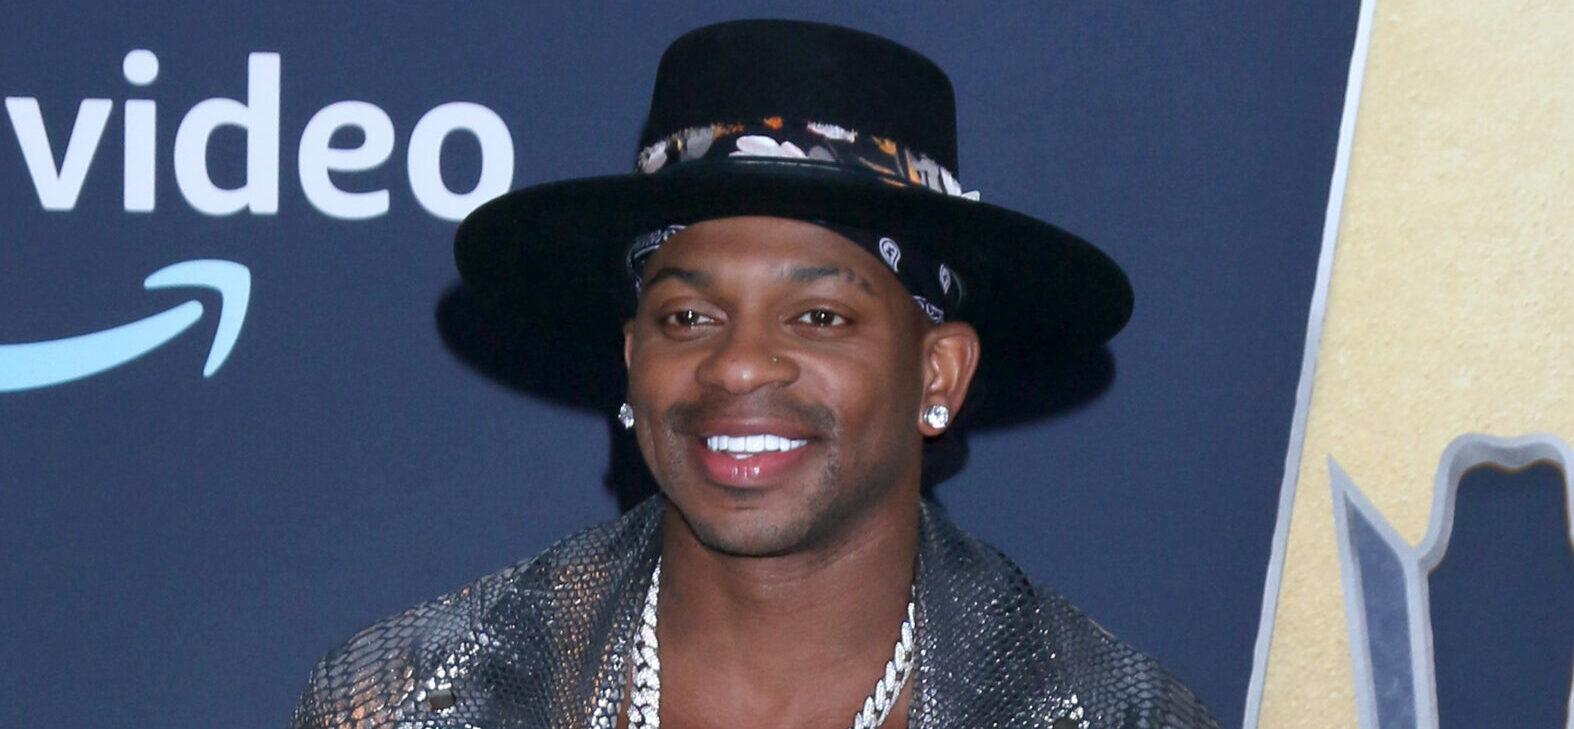 Jimmie Allen at the 2022 Academy of Country Music Awards